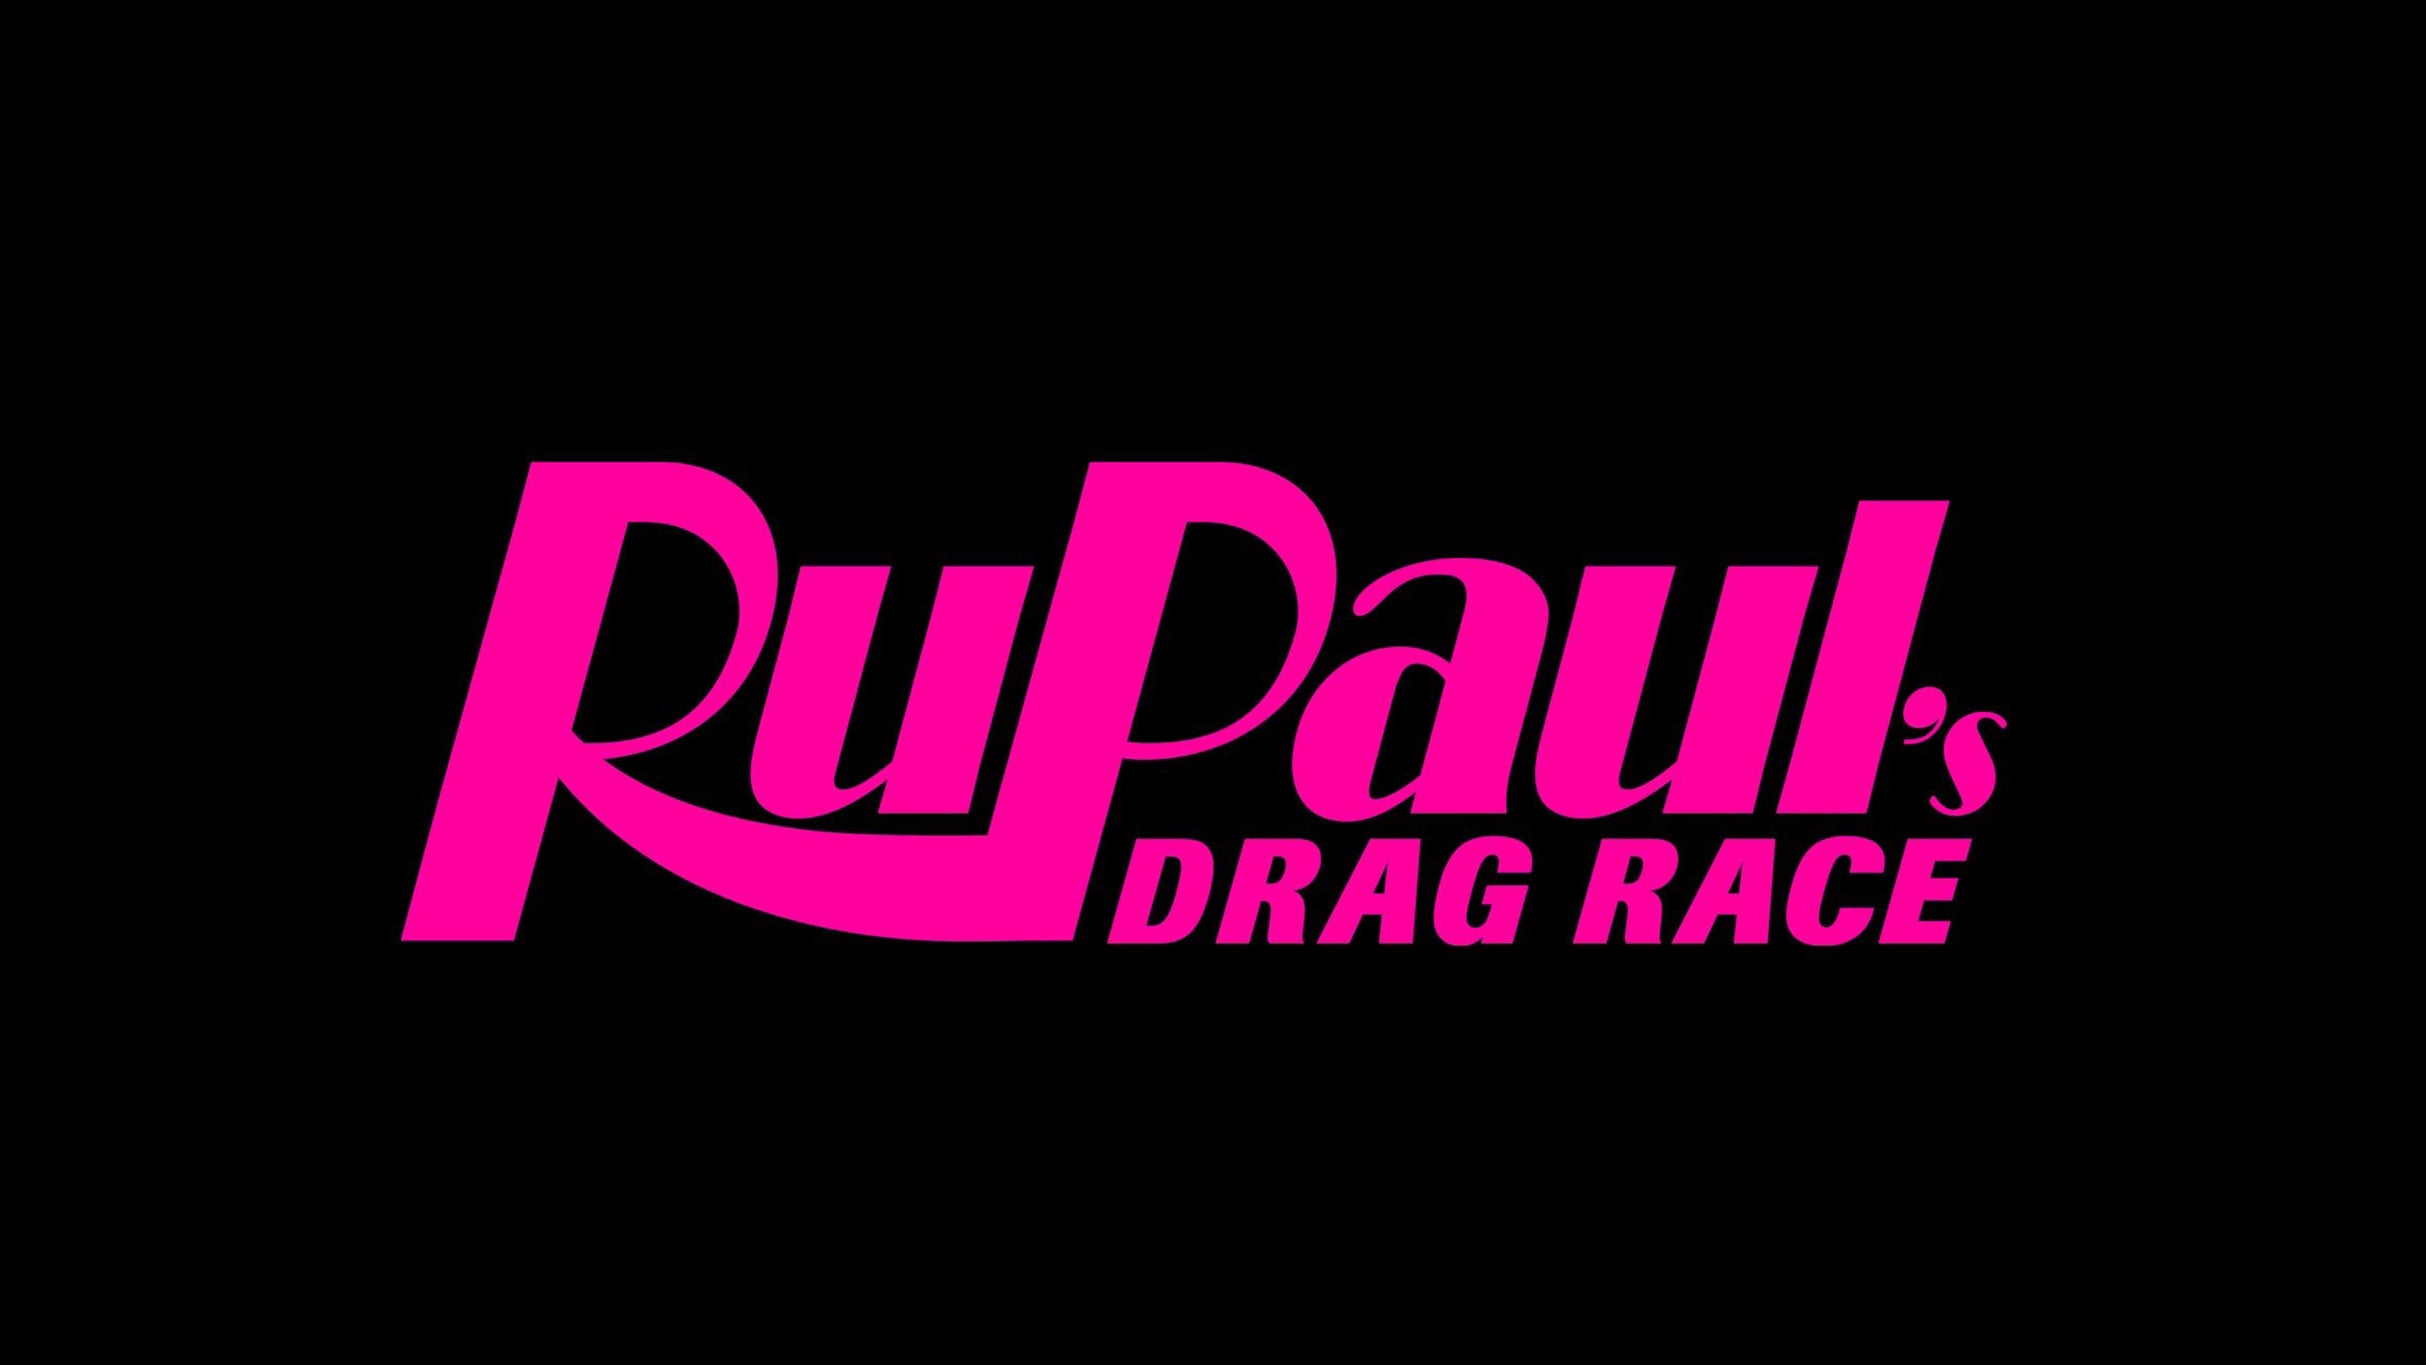 RuPaul's Drag Race at The Theatre at Ace Hotel